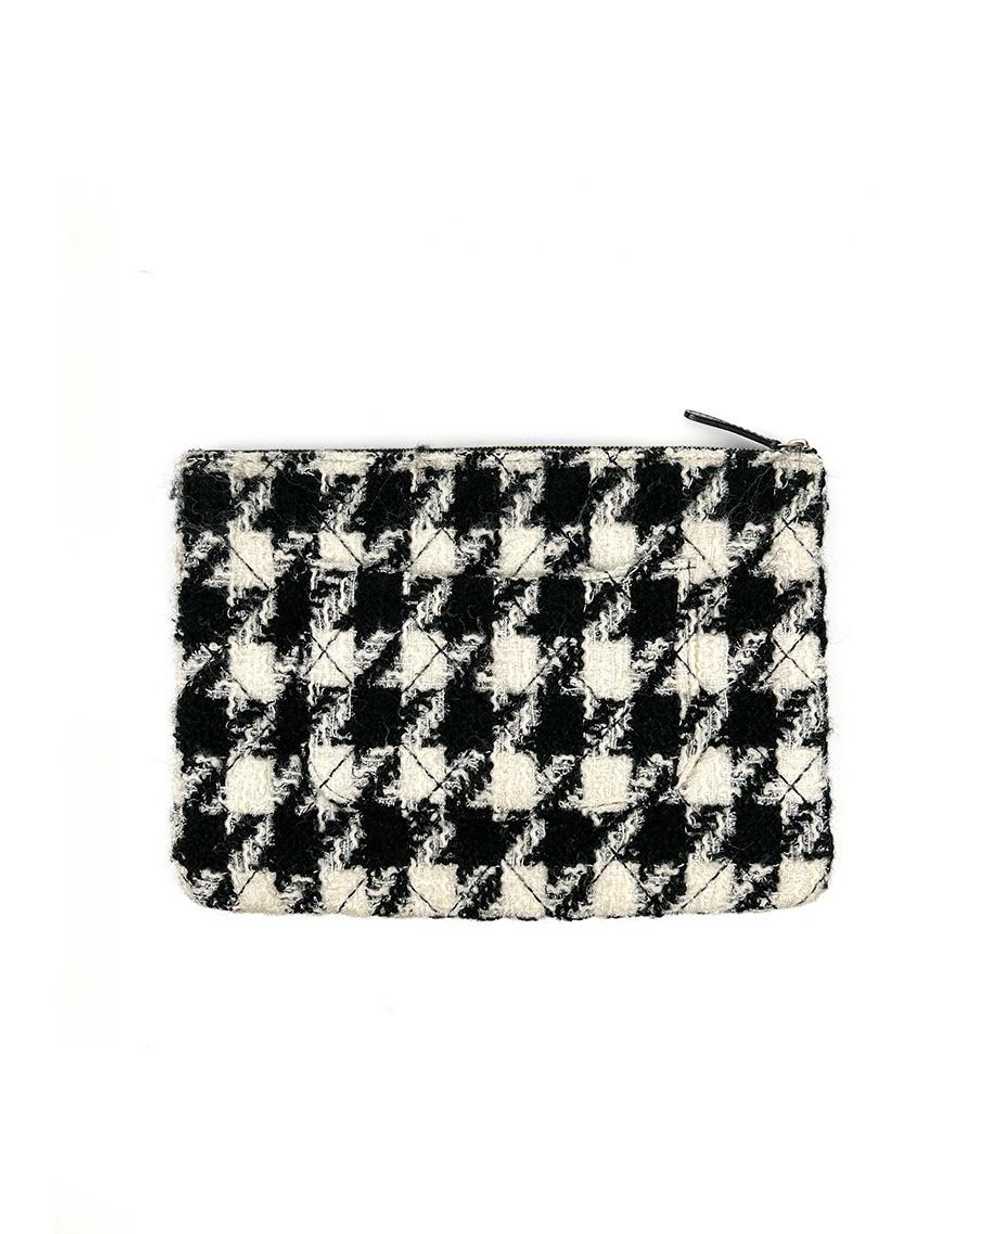 Product Details Houndstooth Tweed Zip Pouch - image 5